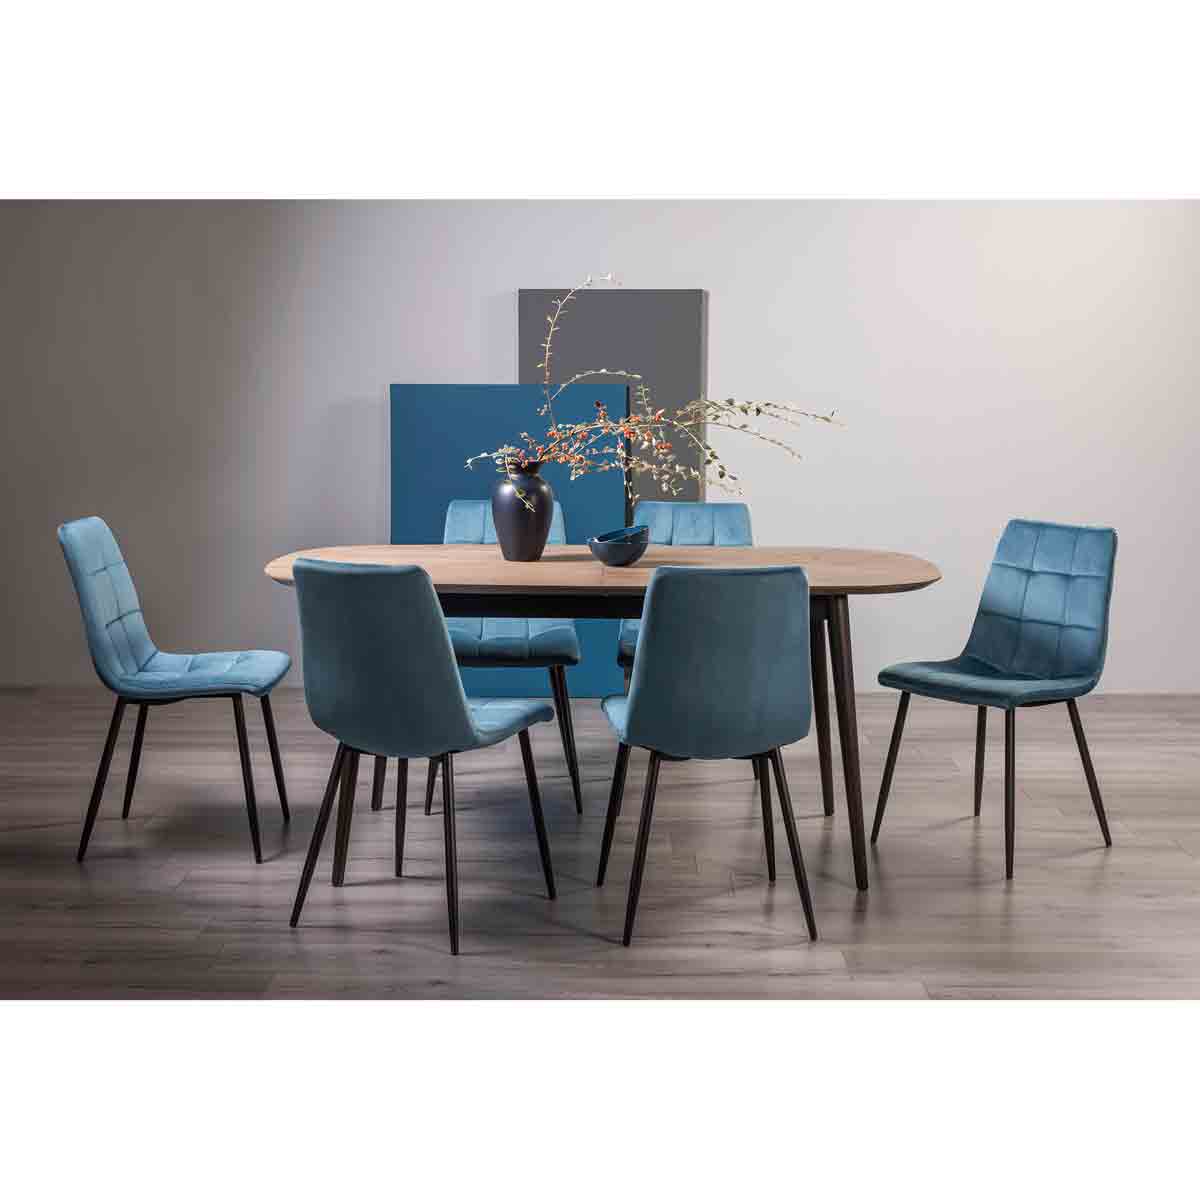 Bentley Designs Rhoka Weathered Oak 6-8 Seater Dining Table With Peppercorn Legs & 6 Mondrian Petrol Blue Velvet Fabric Chairs With Black Powder Coated Legs